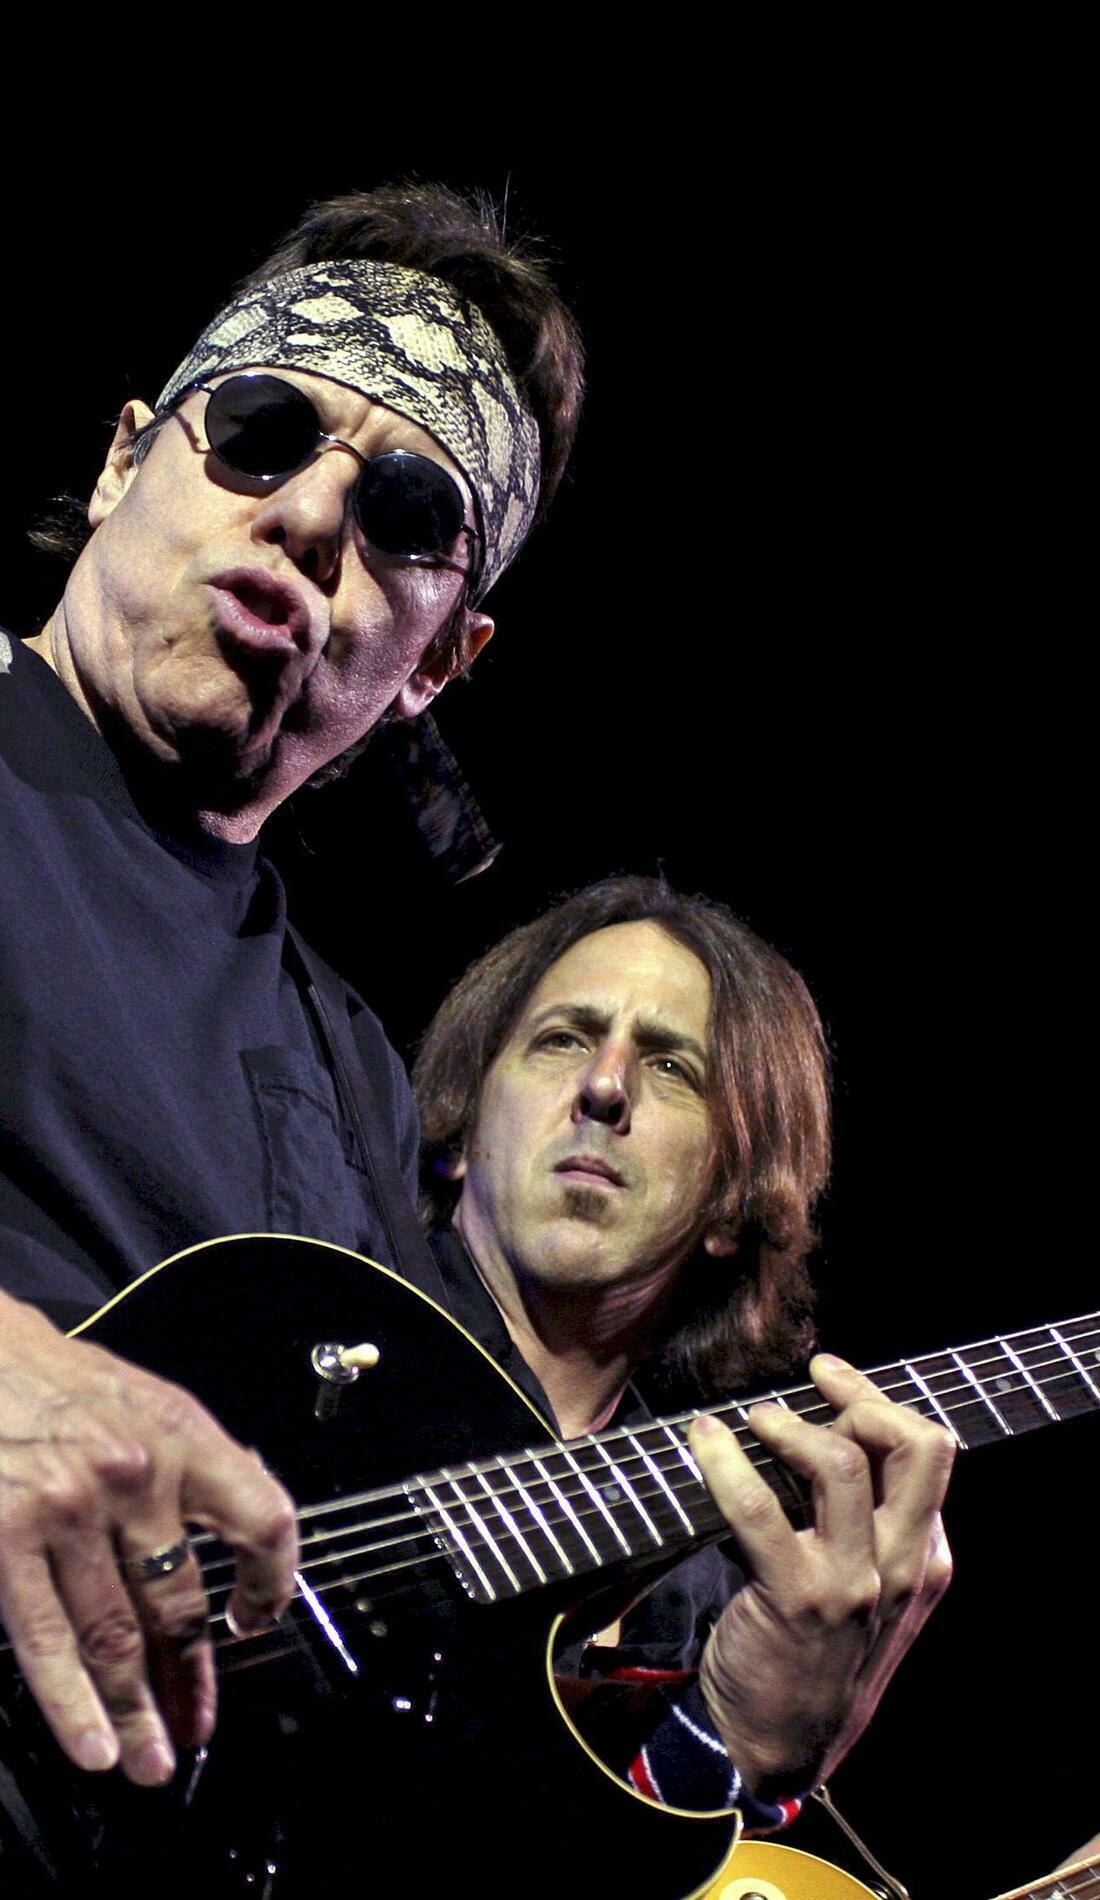 A George Thorogood & The Destroyers live event